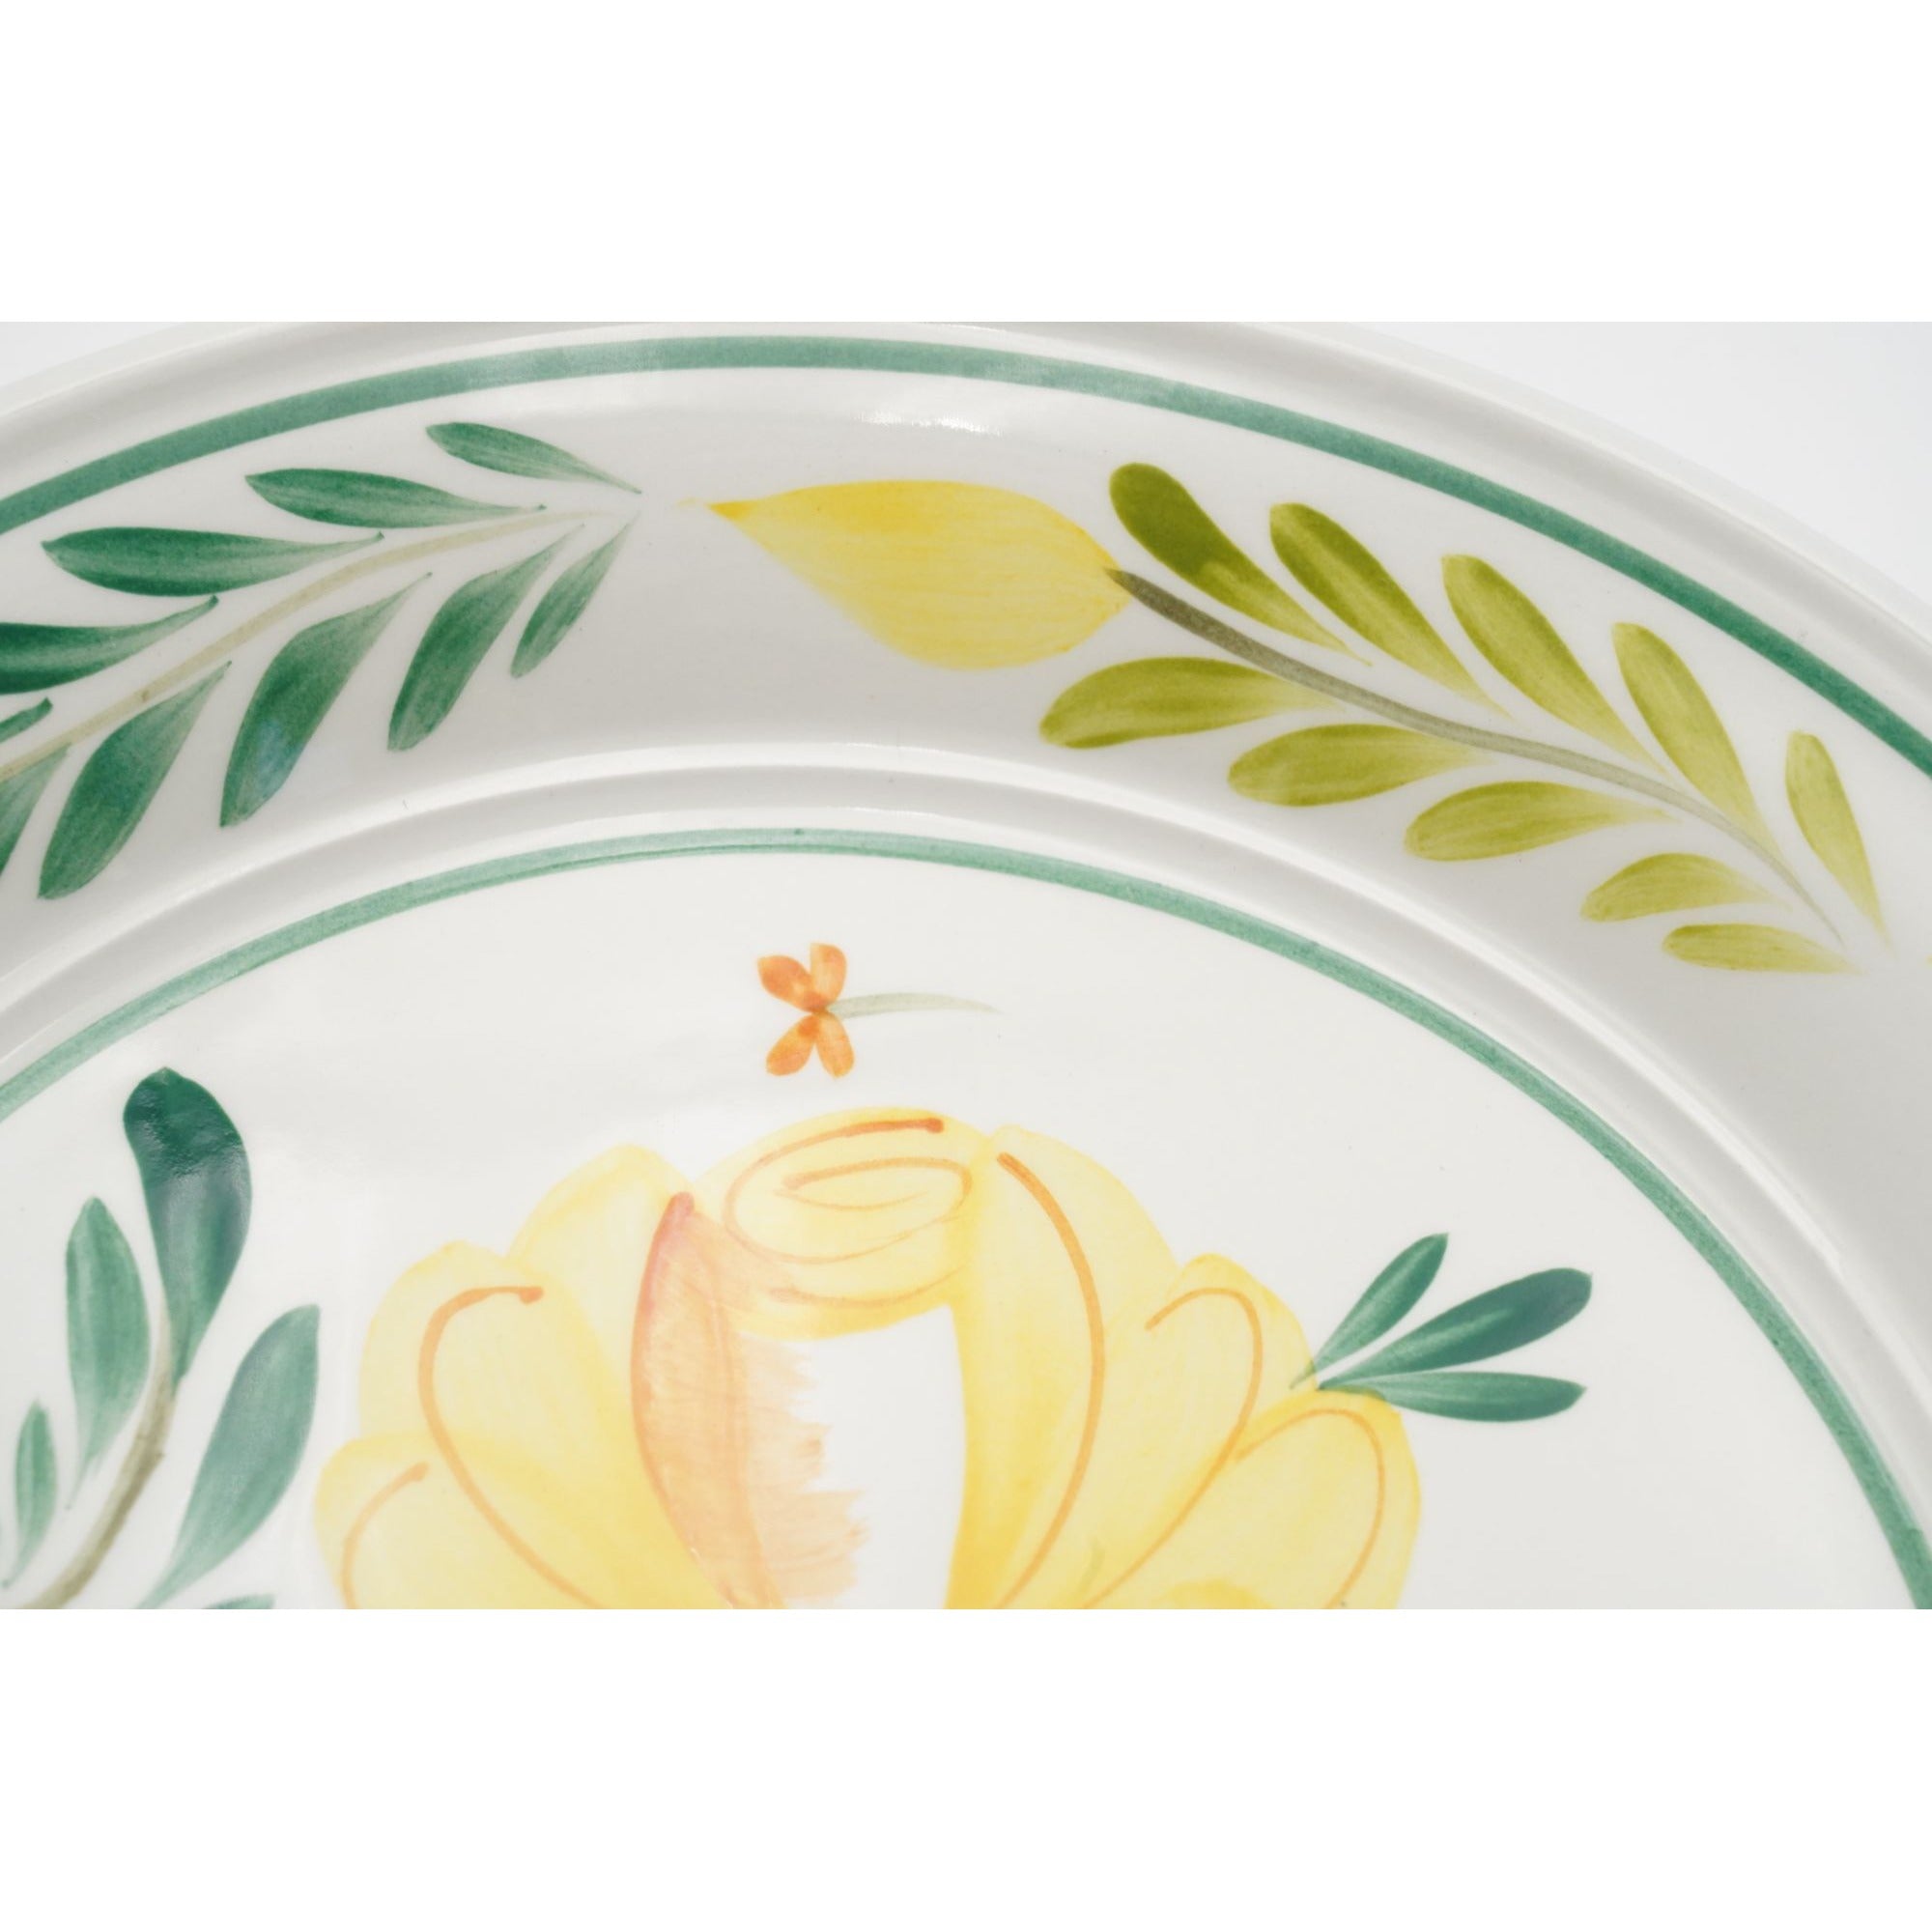 Macy's Hand-Painted Yellow Rose 8.5" Salad Plate by Portmeirion in Britain